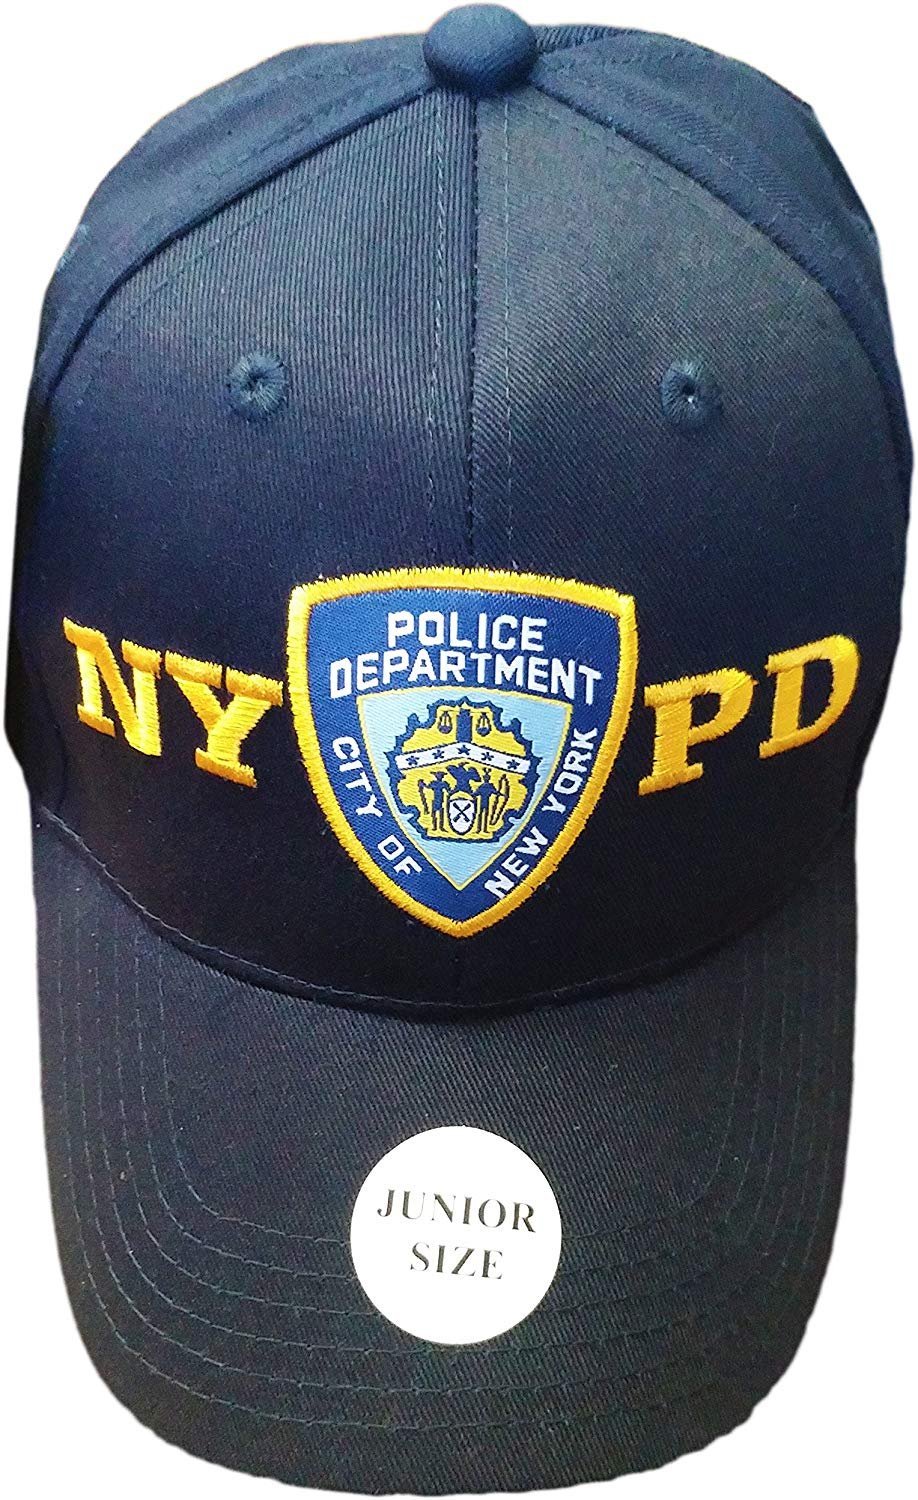 NYPD Kids Baseball Hat Junior Cap Officially Licensed New York Police Department